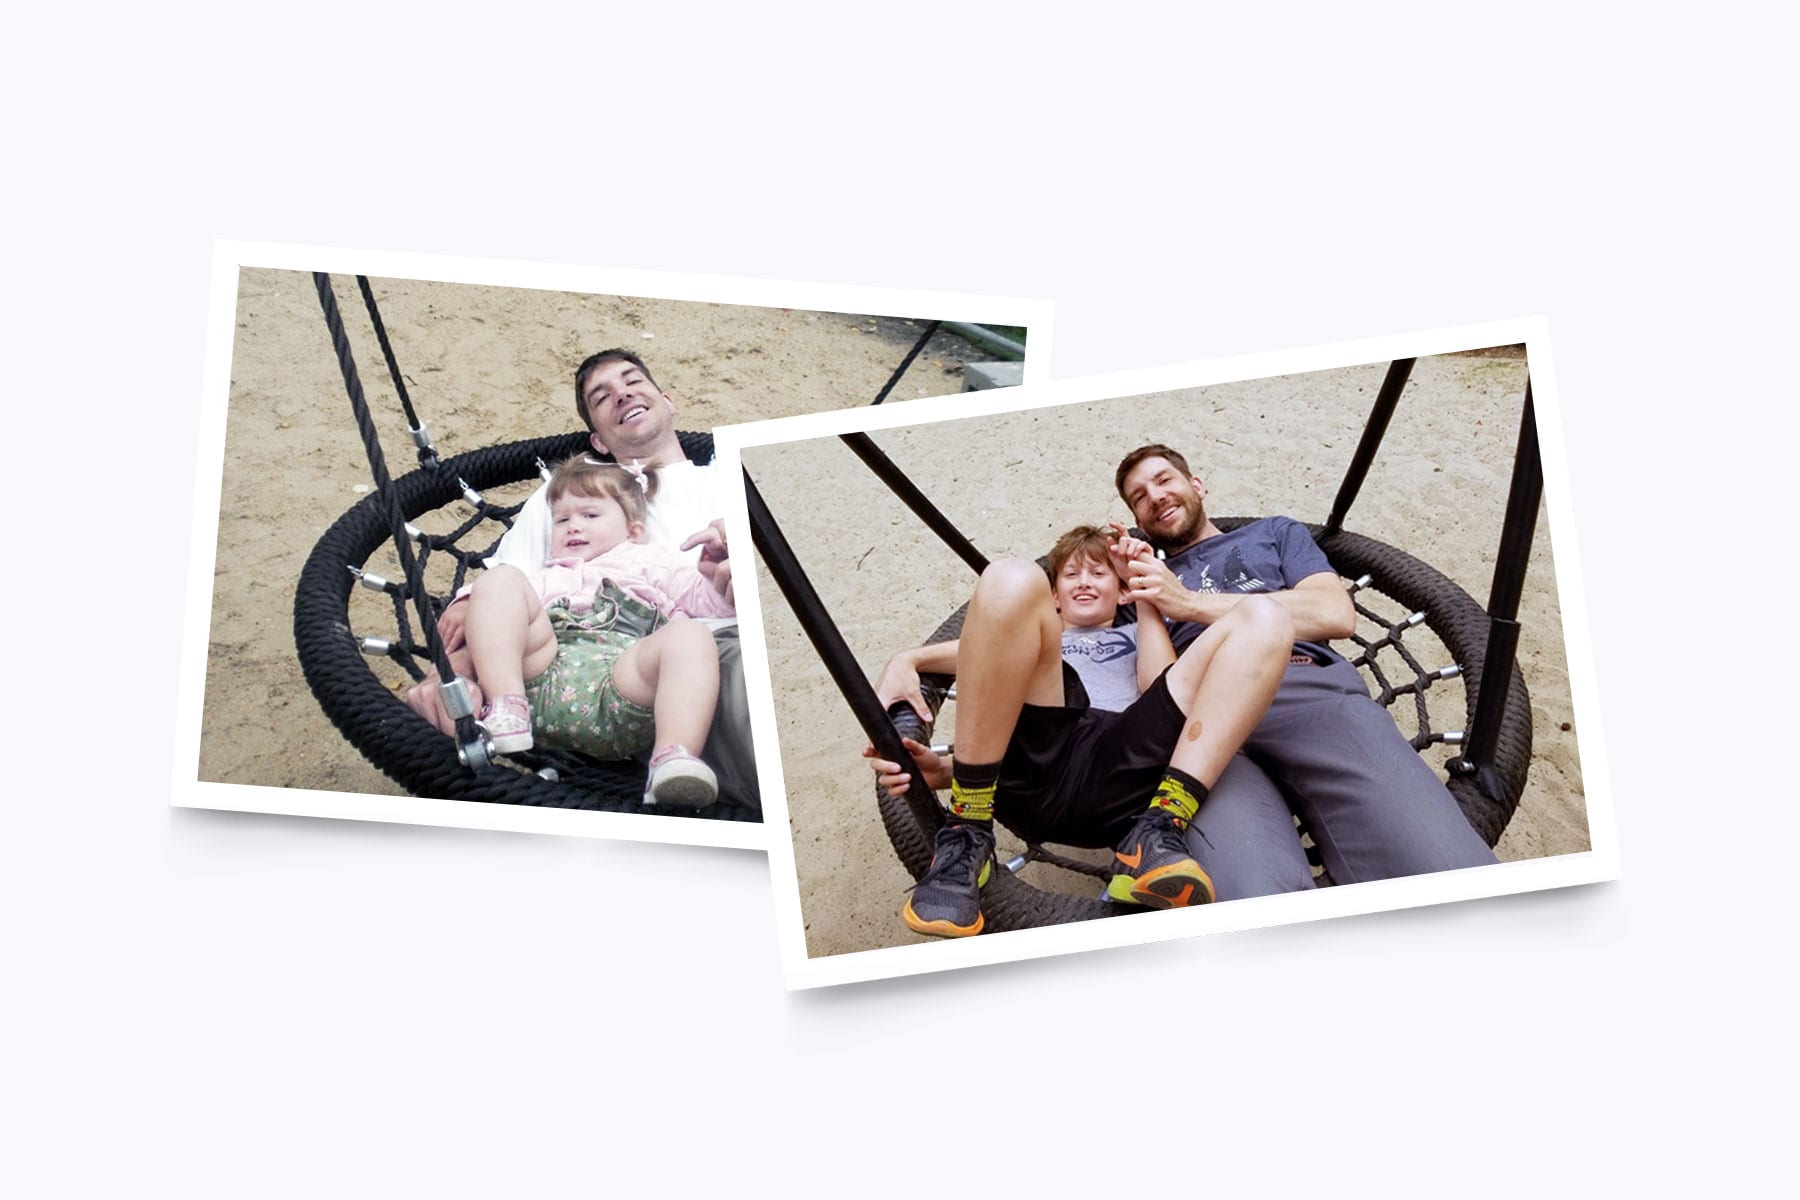 Before and after images of a father and son on a swing